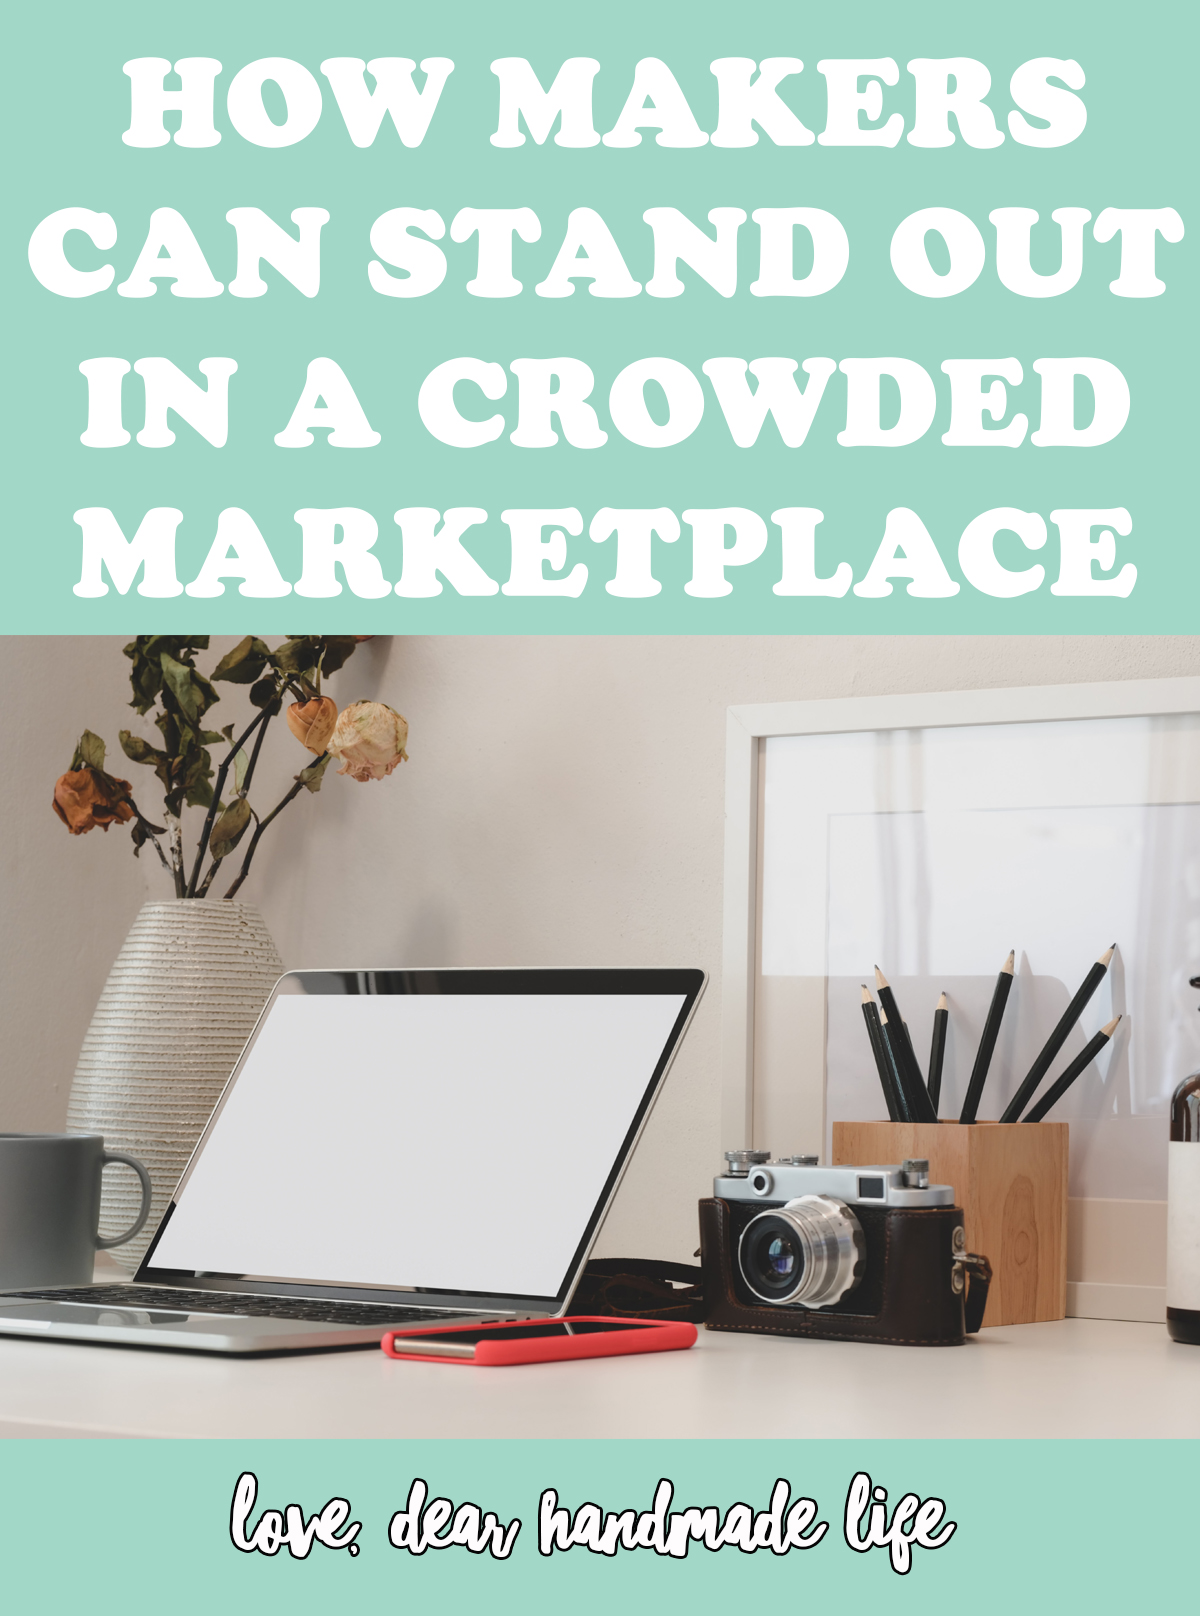 How makers can stand out in a crowded marketplace Dear Handmade Life